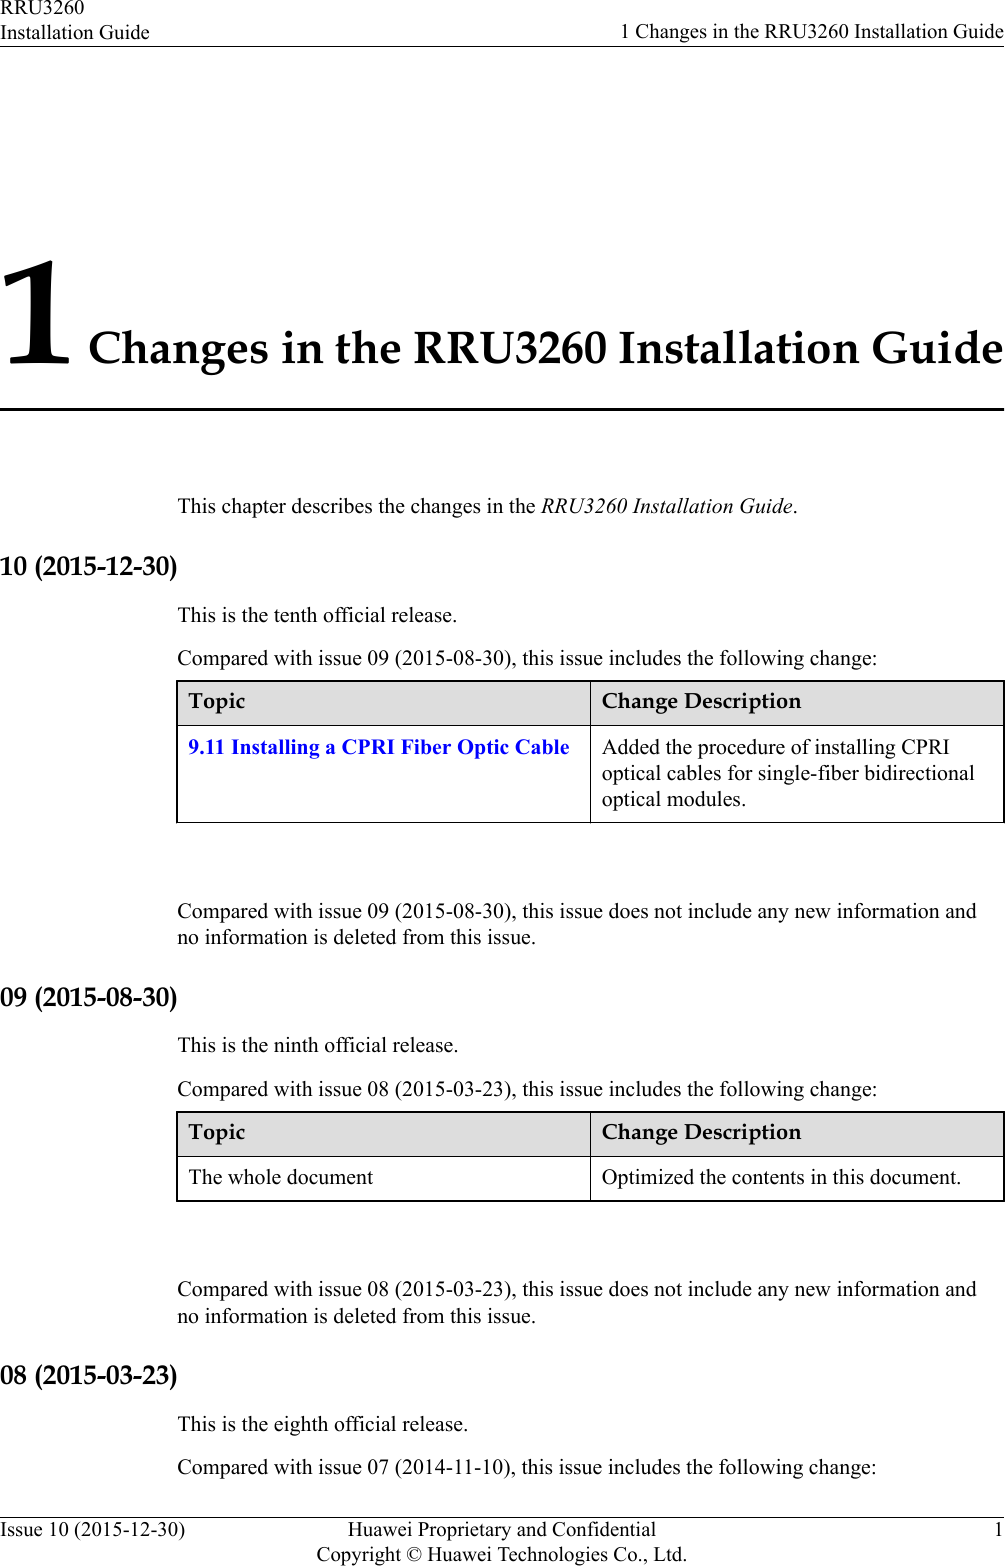 1 Changes in the RRU3260 Installation GuideThis chapter describes the changes in the RRU3260 Installation Guide.10 (2015-12-30)This is the tenth official release.Compared with issue 09 (2015-08-30), this issue includes the following change:Topic Change Description9.11 Installing a CPRI Fiber Optic Cable Added the procedure of installing CPRIoptical cables for single-fiber bidirectionaloptical modules. Compared with issue 09 (2015-08-30), this issue does not include any new information andno information is deleted from this issue.09 (2015-08-30)This is the ninth official release.Compared with issue 08 (2015-03-23), this issue includes the following change:Topic Change DescriptionThe whole document Optimized the contents in this document. Compared with issue 08 (2015-03-23), this issue does not include any new information andno information is deleted from this issue.08 (2015-03-23)This is the eighth official release.Compared with issue 07 (2014-11-10), this issue includes the following change:RRU3260Installation Guide 1 Changes in the RRU3260 Installation GuideIssue 10 (2015-12-30) Huawei Proprietary and ConfidentialCopyright © Huawei Technologies Co., Ltd.1